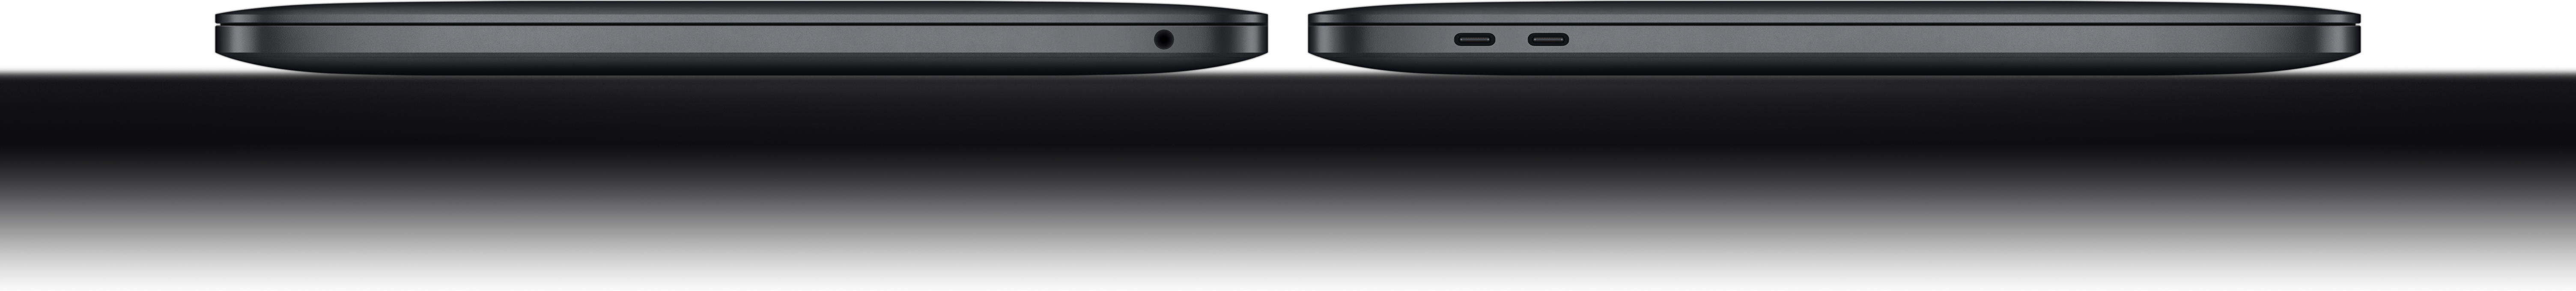 Side view of the MacBook Pro, showing the SDXC card slot, three Thunderbolt 4 ports, HDMI port, MagSafe 3 charging port, and  headphone jack.